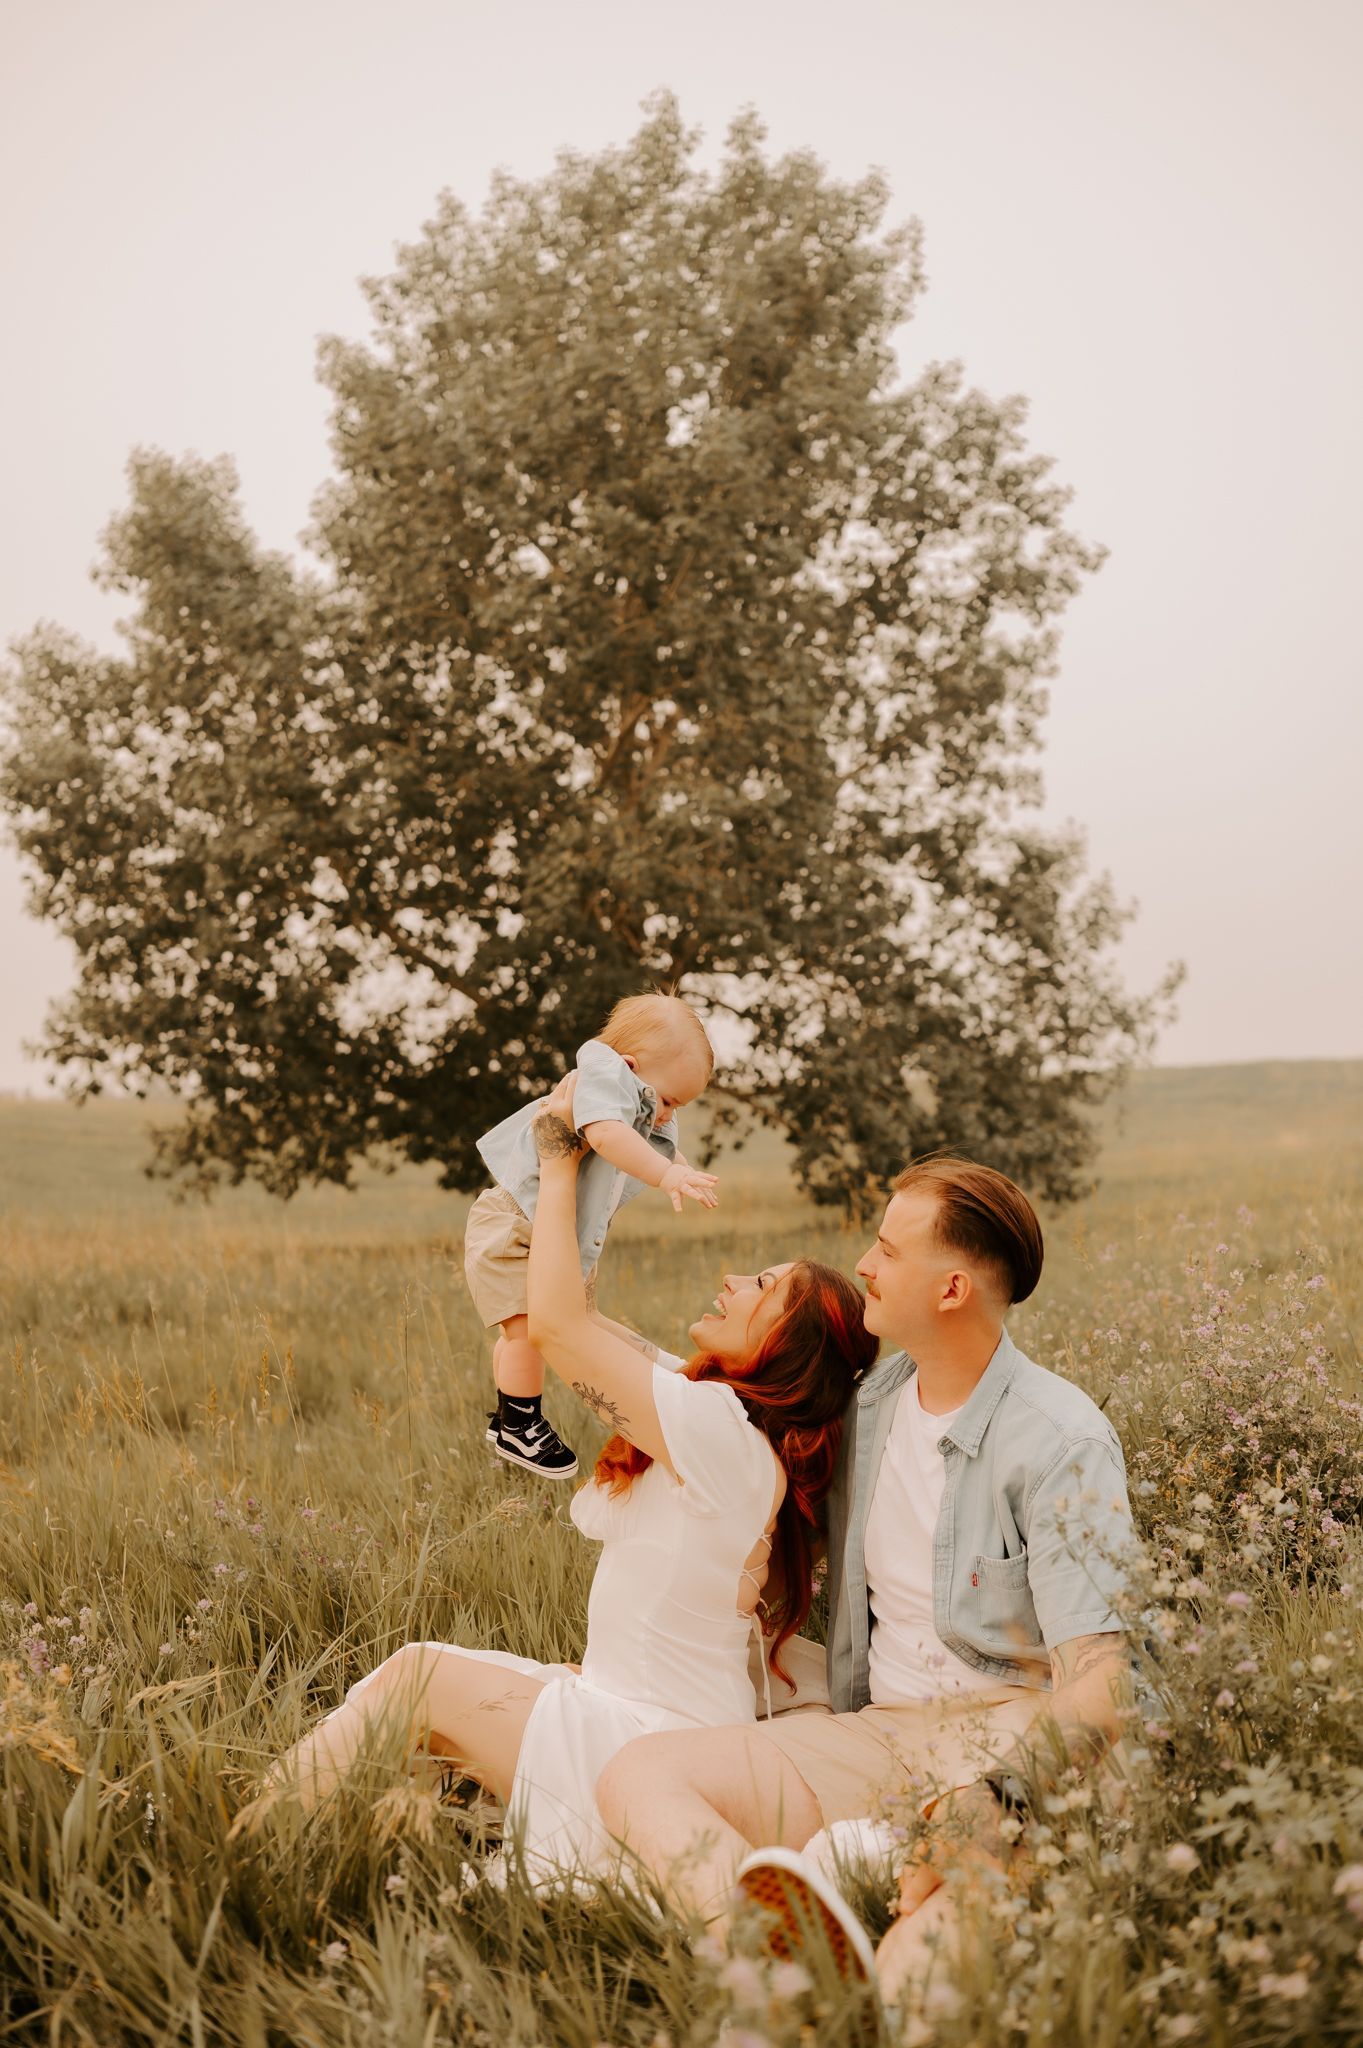  A father throws his laughing son up in the air while they're in a sunflower field. The mother holds their baby closely and admires them. 